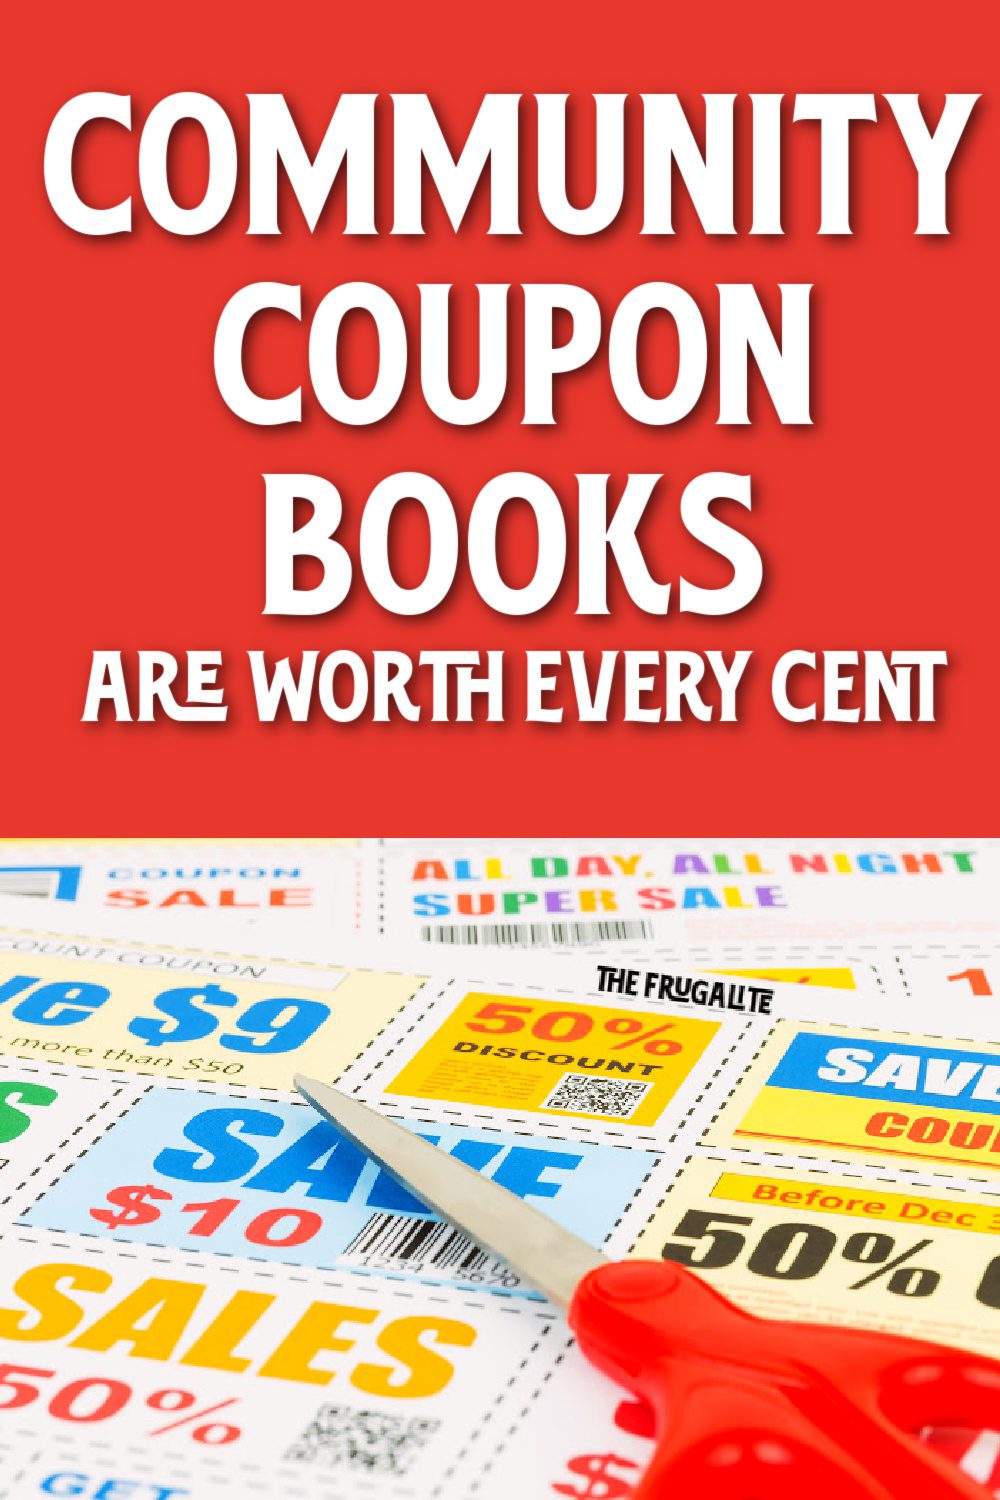 Community Coupon Books Are Worth Every Cent